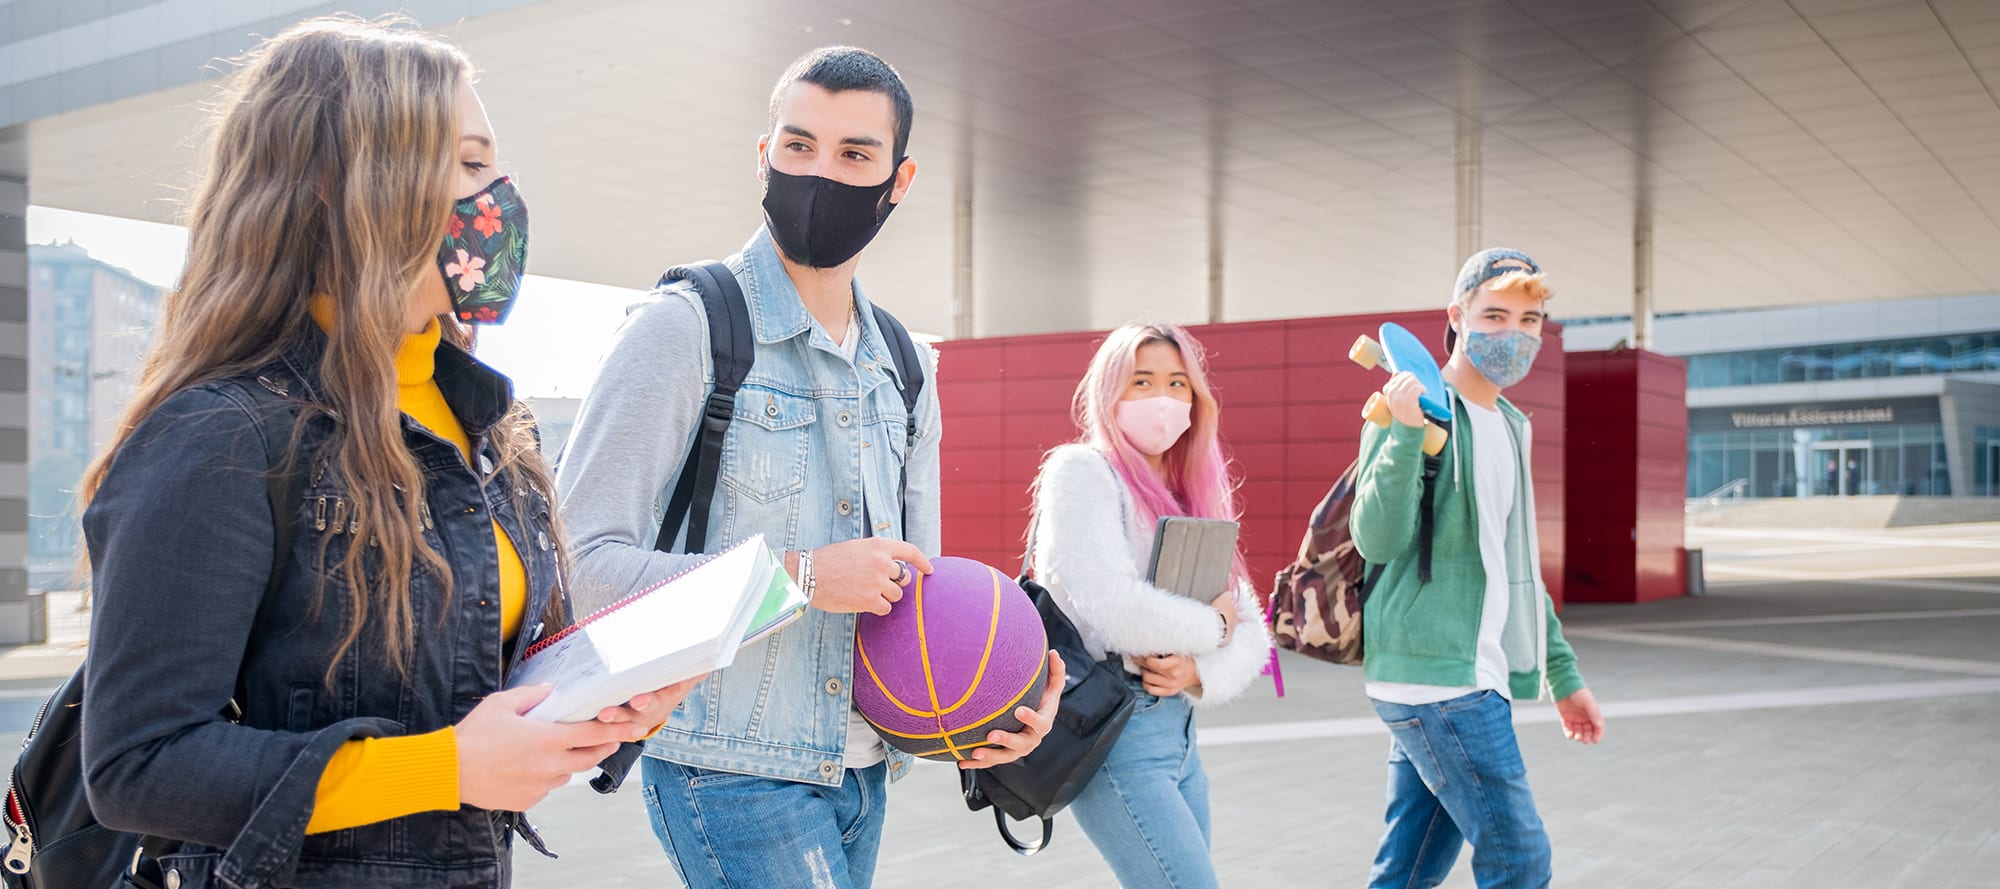 College Students walking together with medical masks on